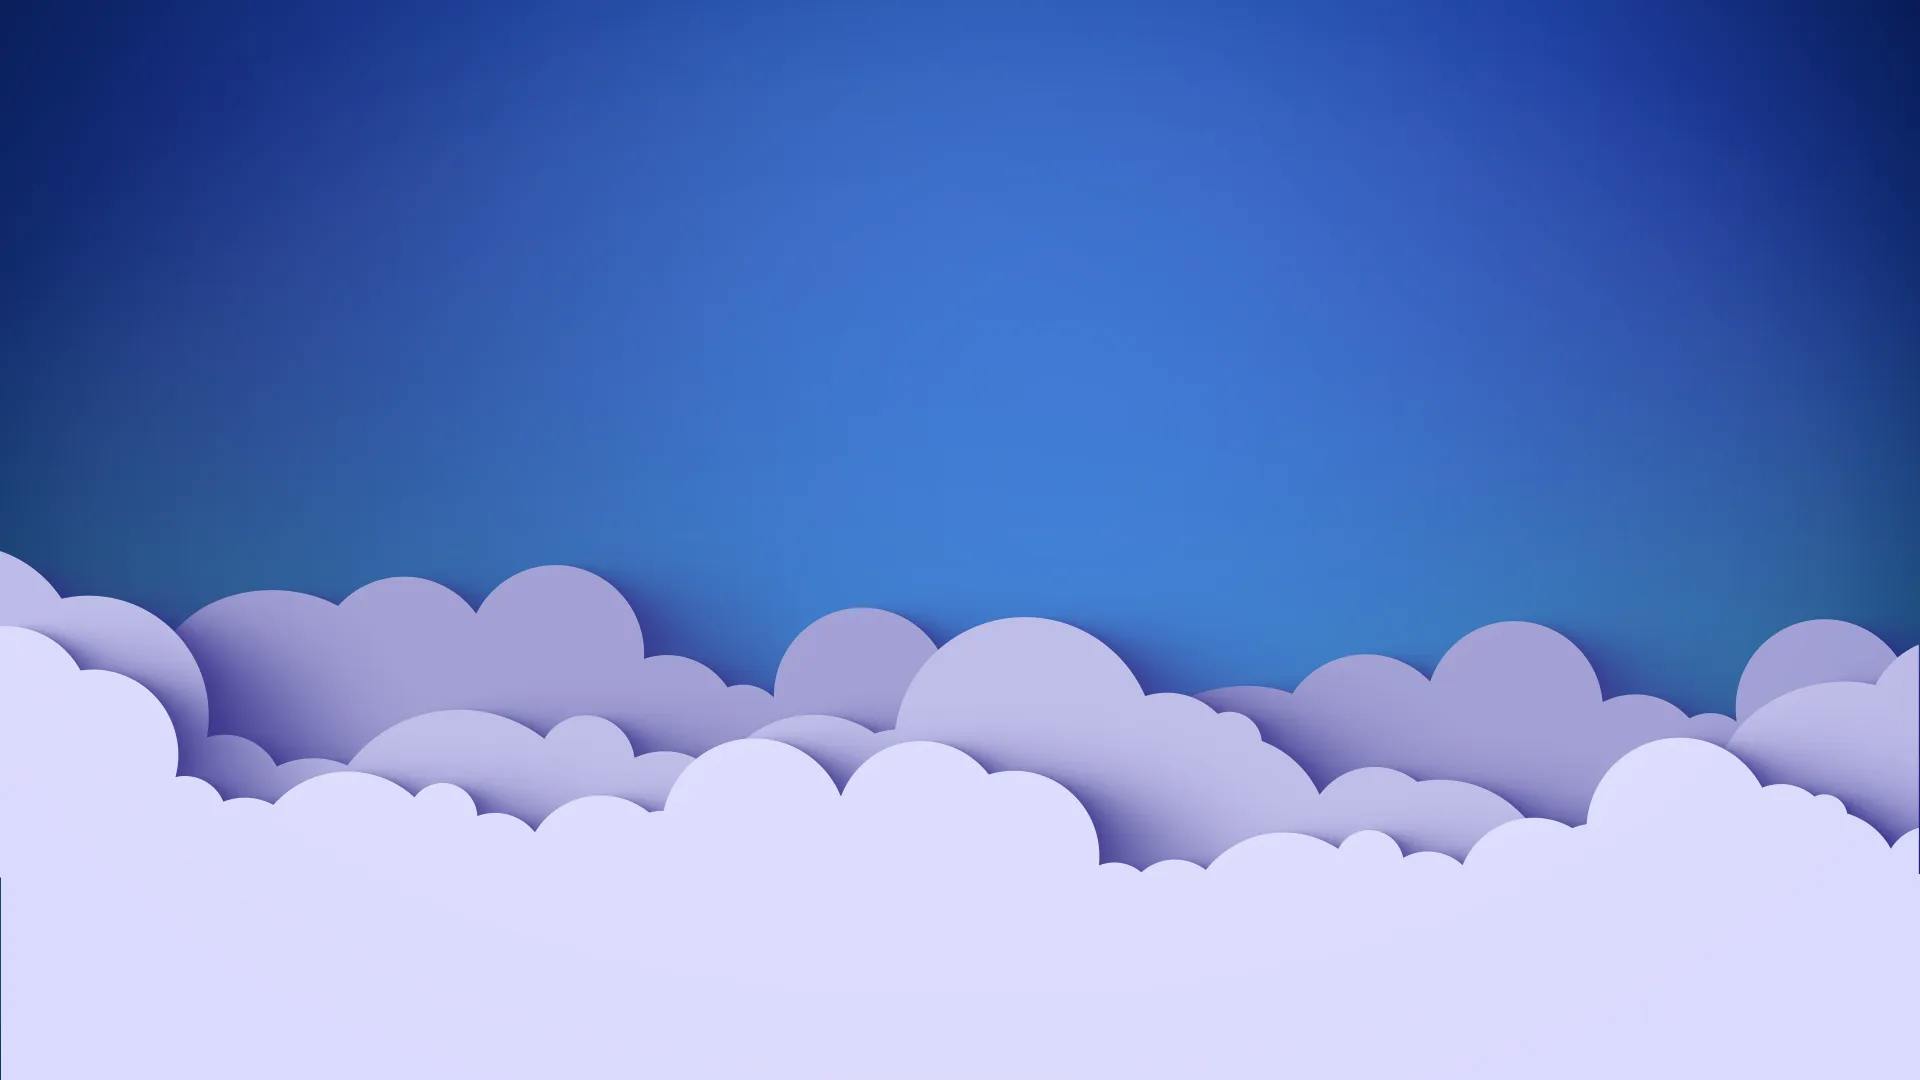 Virtual set background created in after effects.